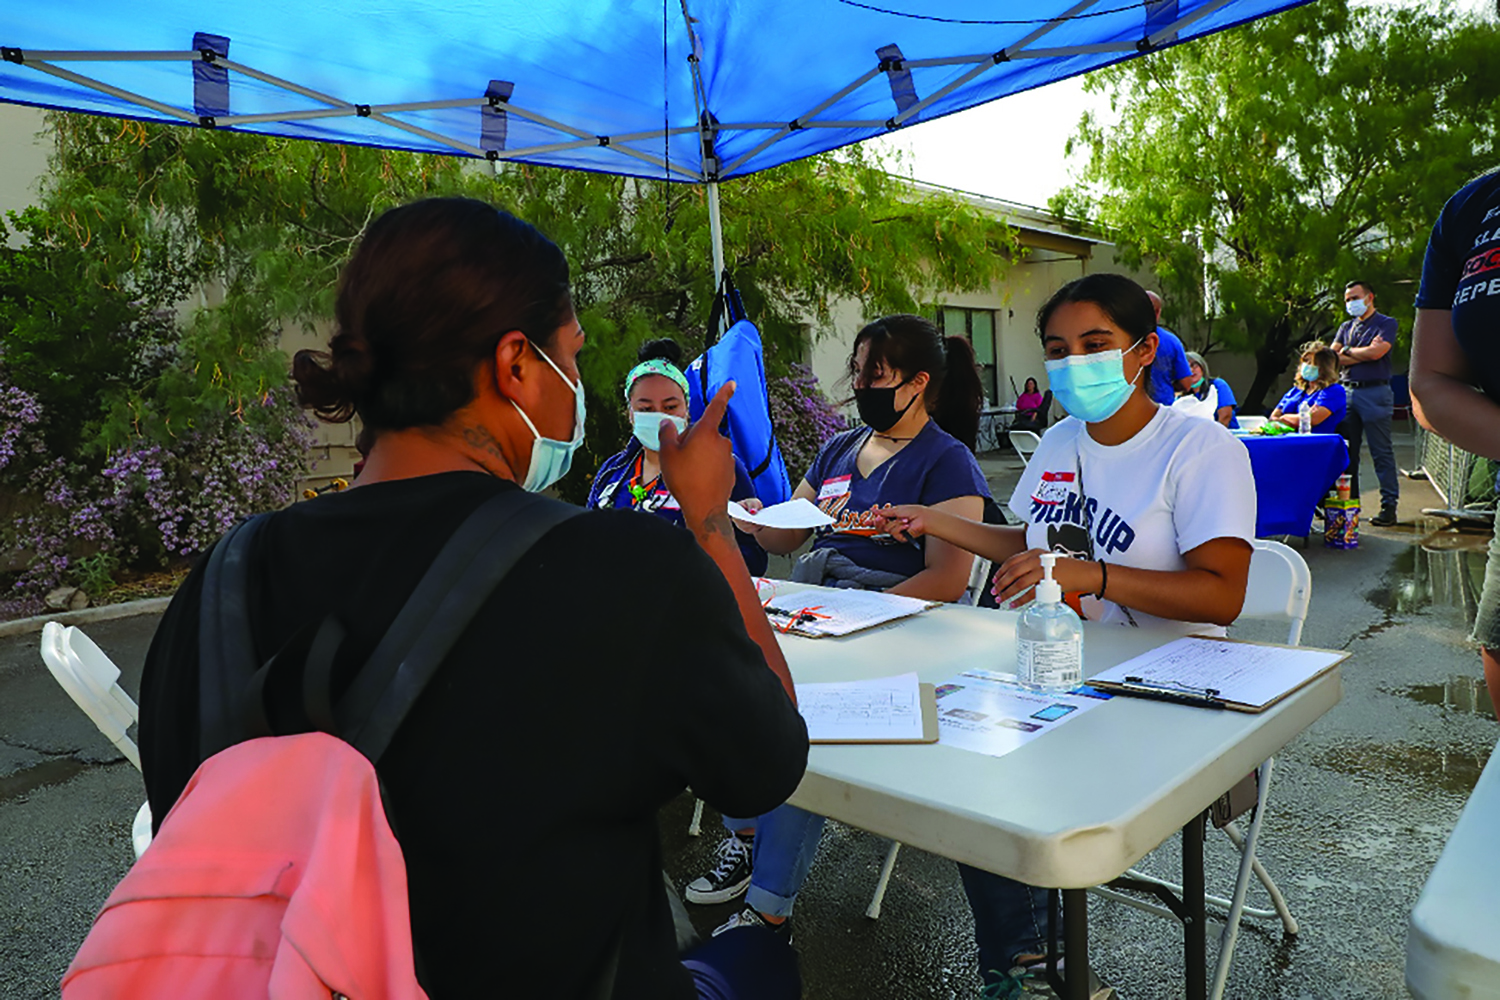 University of Texas at El Paso social work students volunteer at a Health Opportunity Prevention Education (HOPE) fair for members of the homeless and immigrant communities